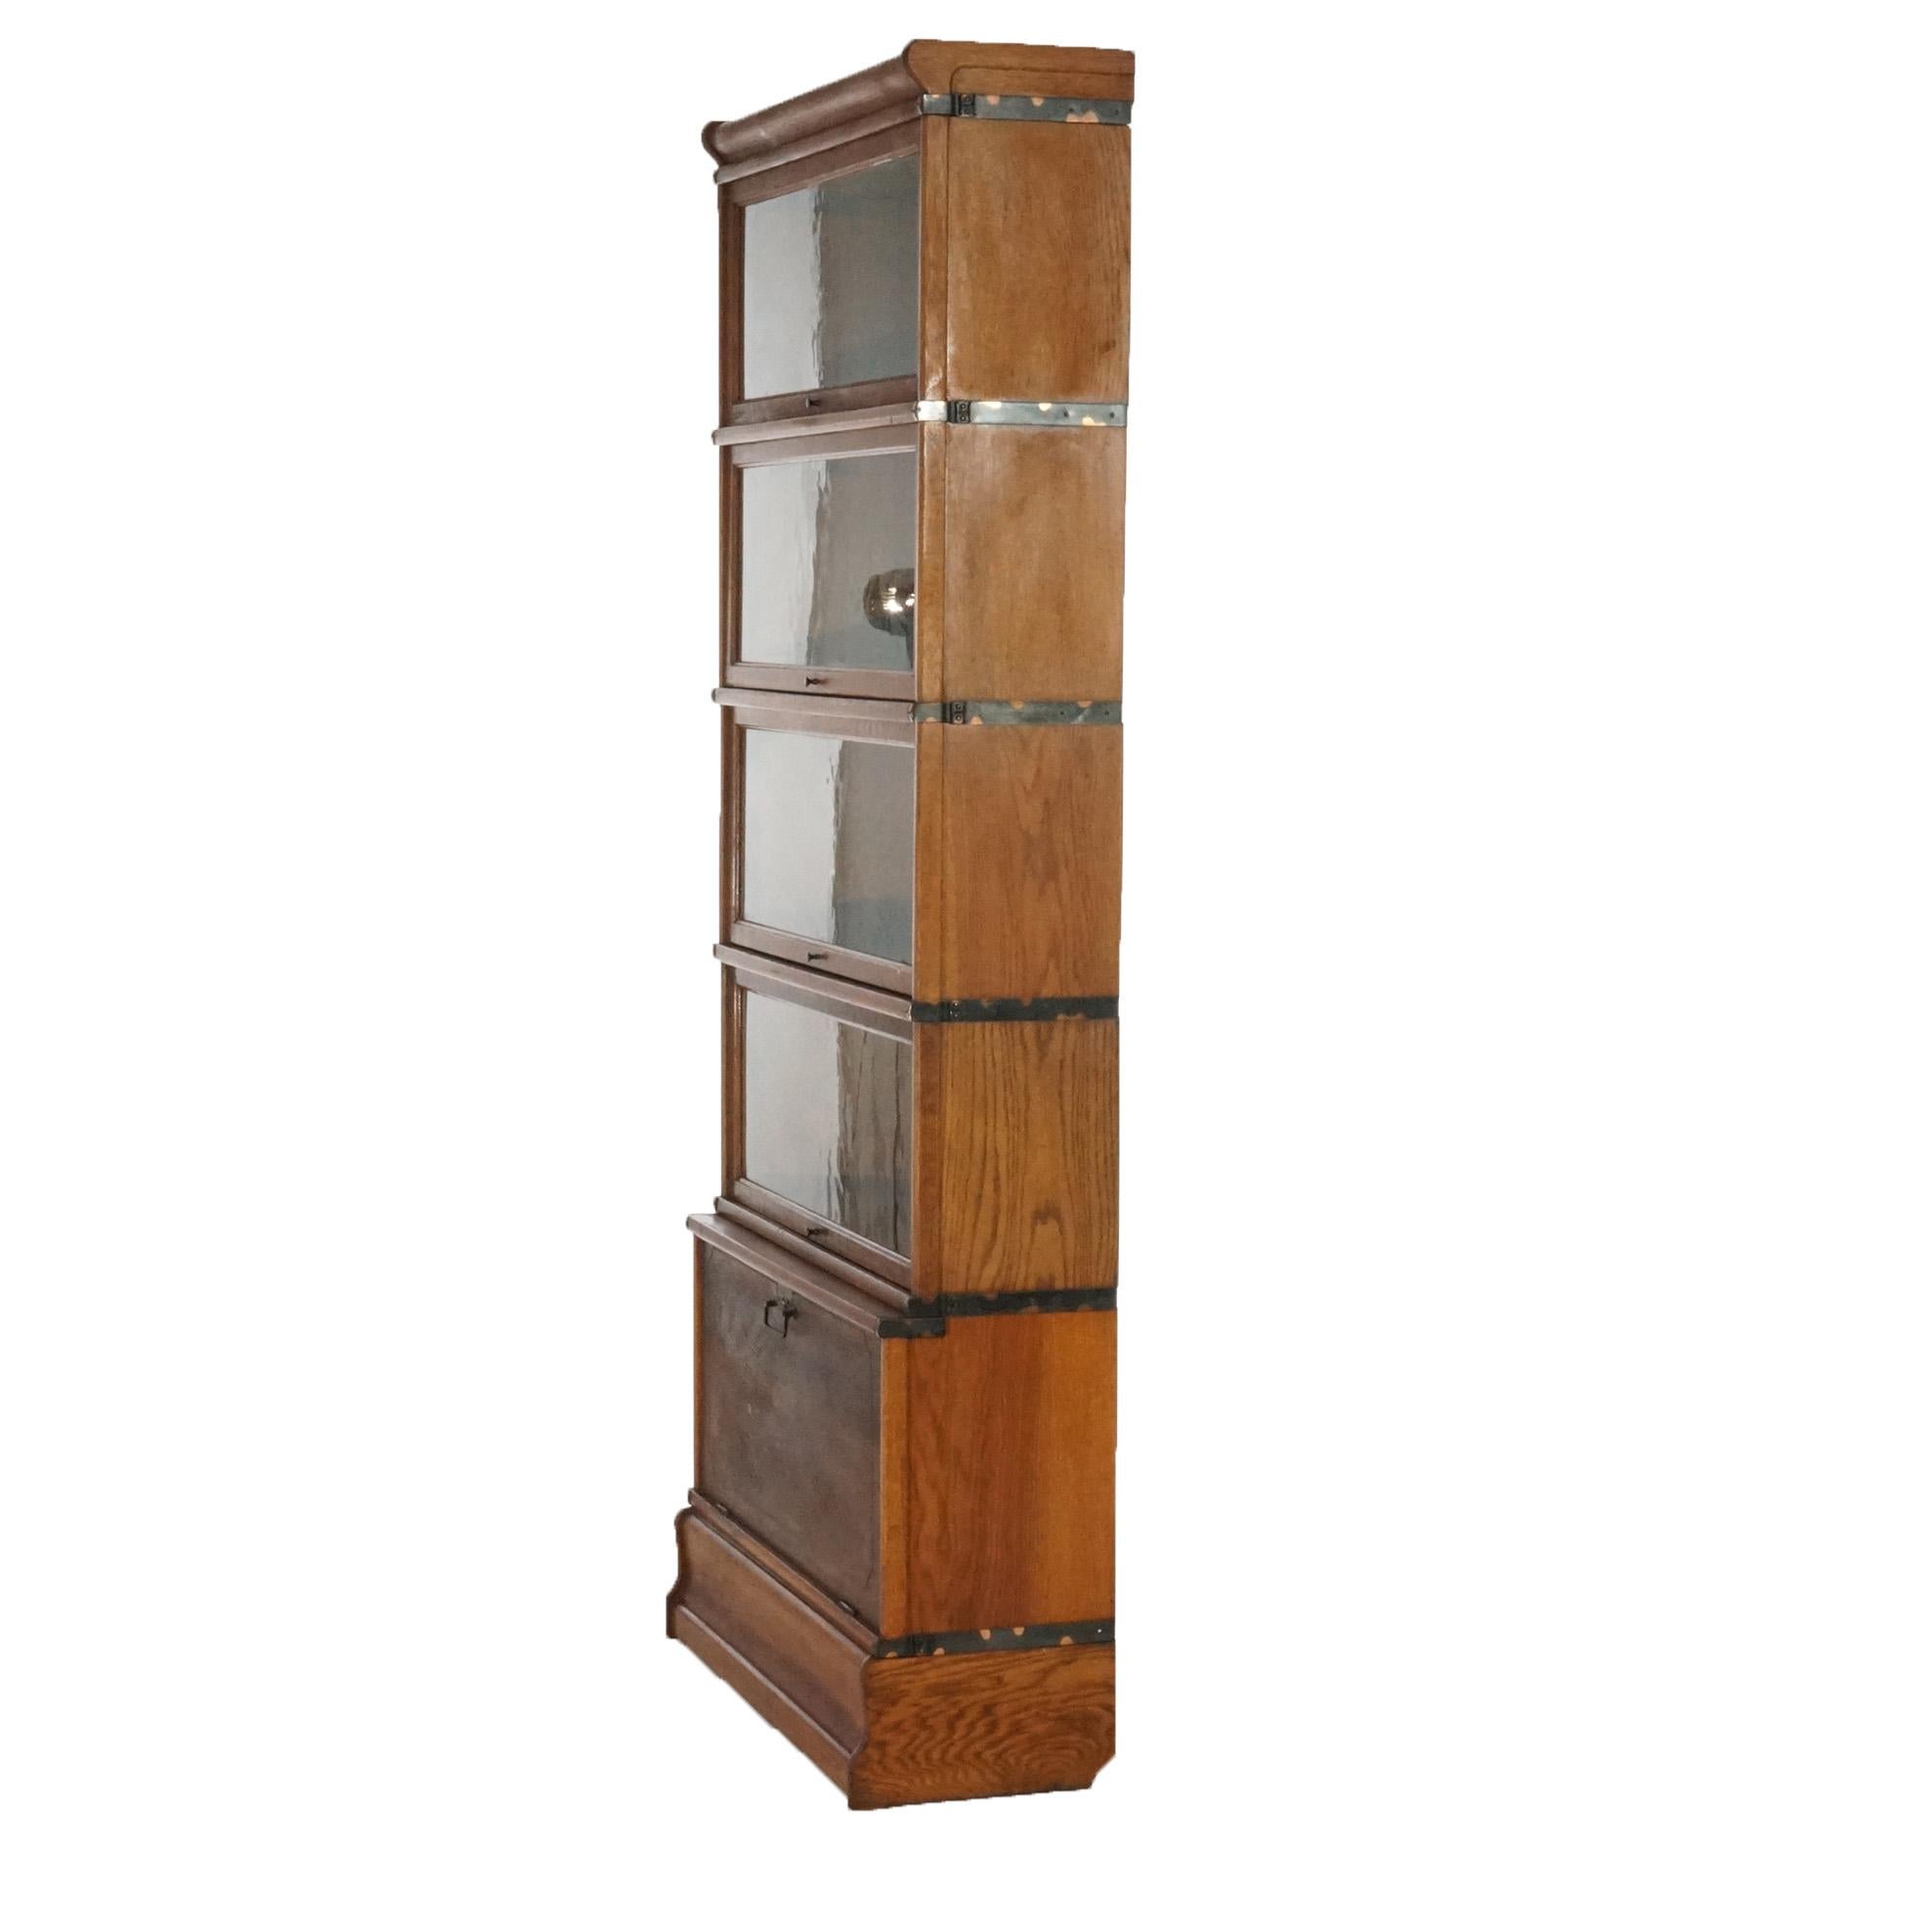 Arts and Crafts Antique Art & Crafts Mission Oak Globe Wernicke Barrister Bookcase with Filer